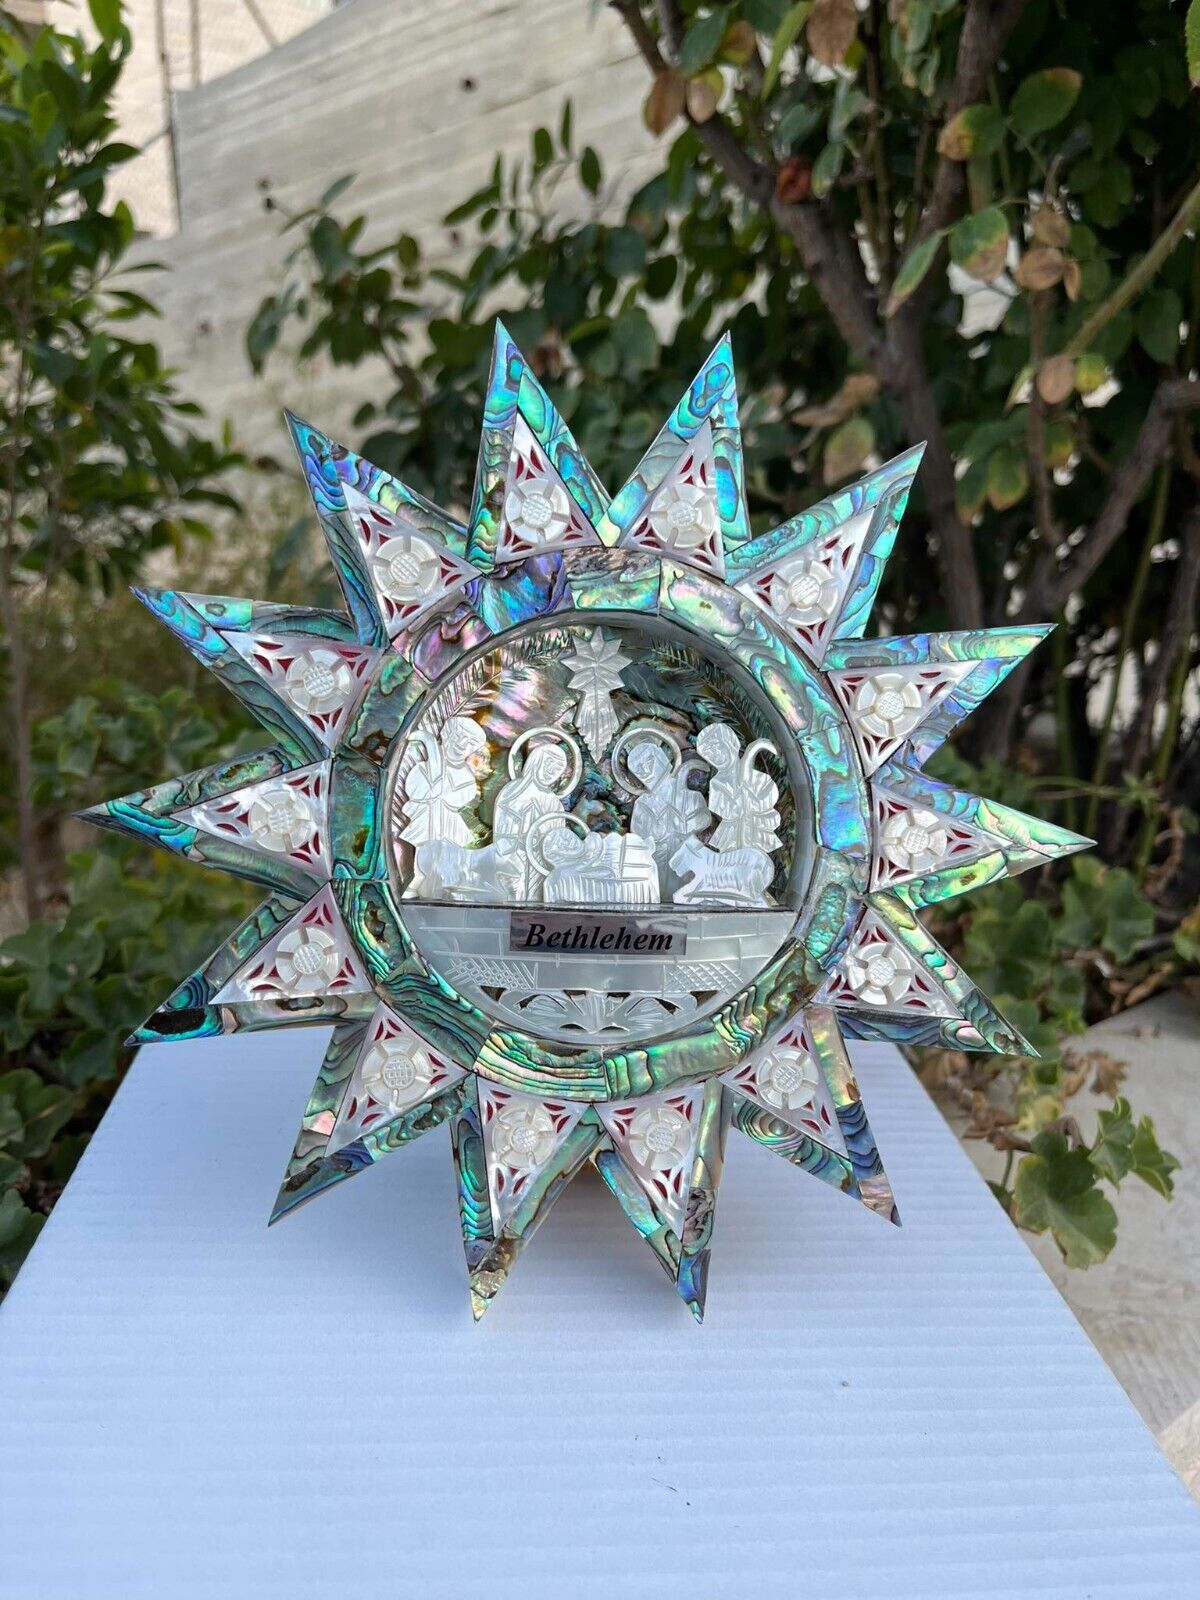 A Rare Star Of Nativity Mother Of Pearl Crafted By Hand From Bethlehem